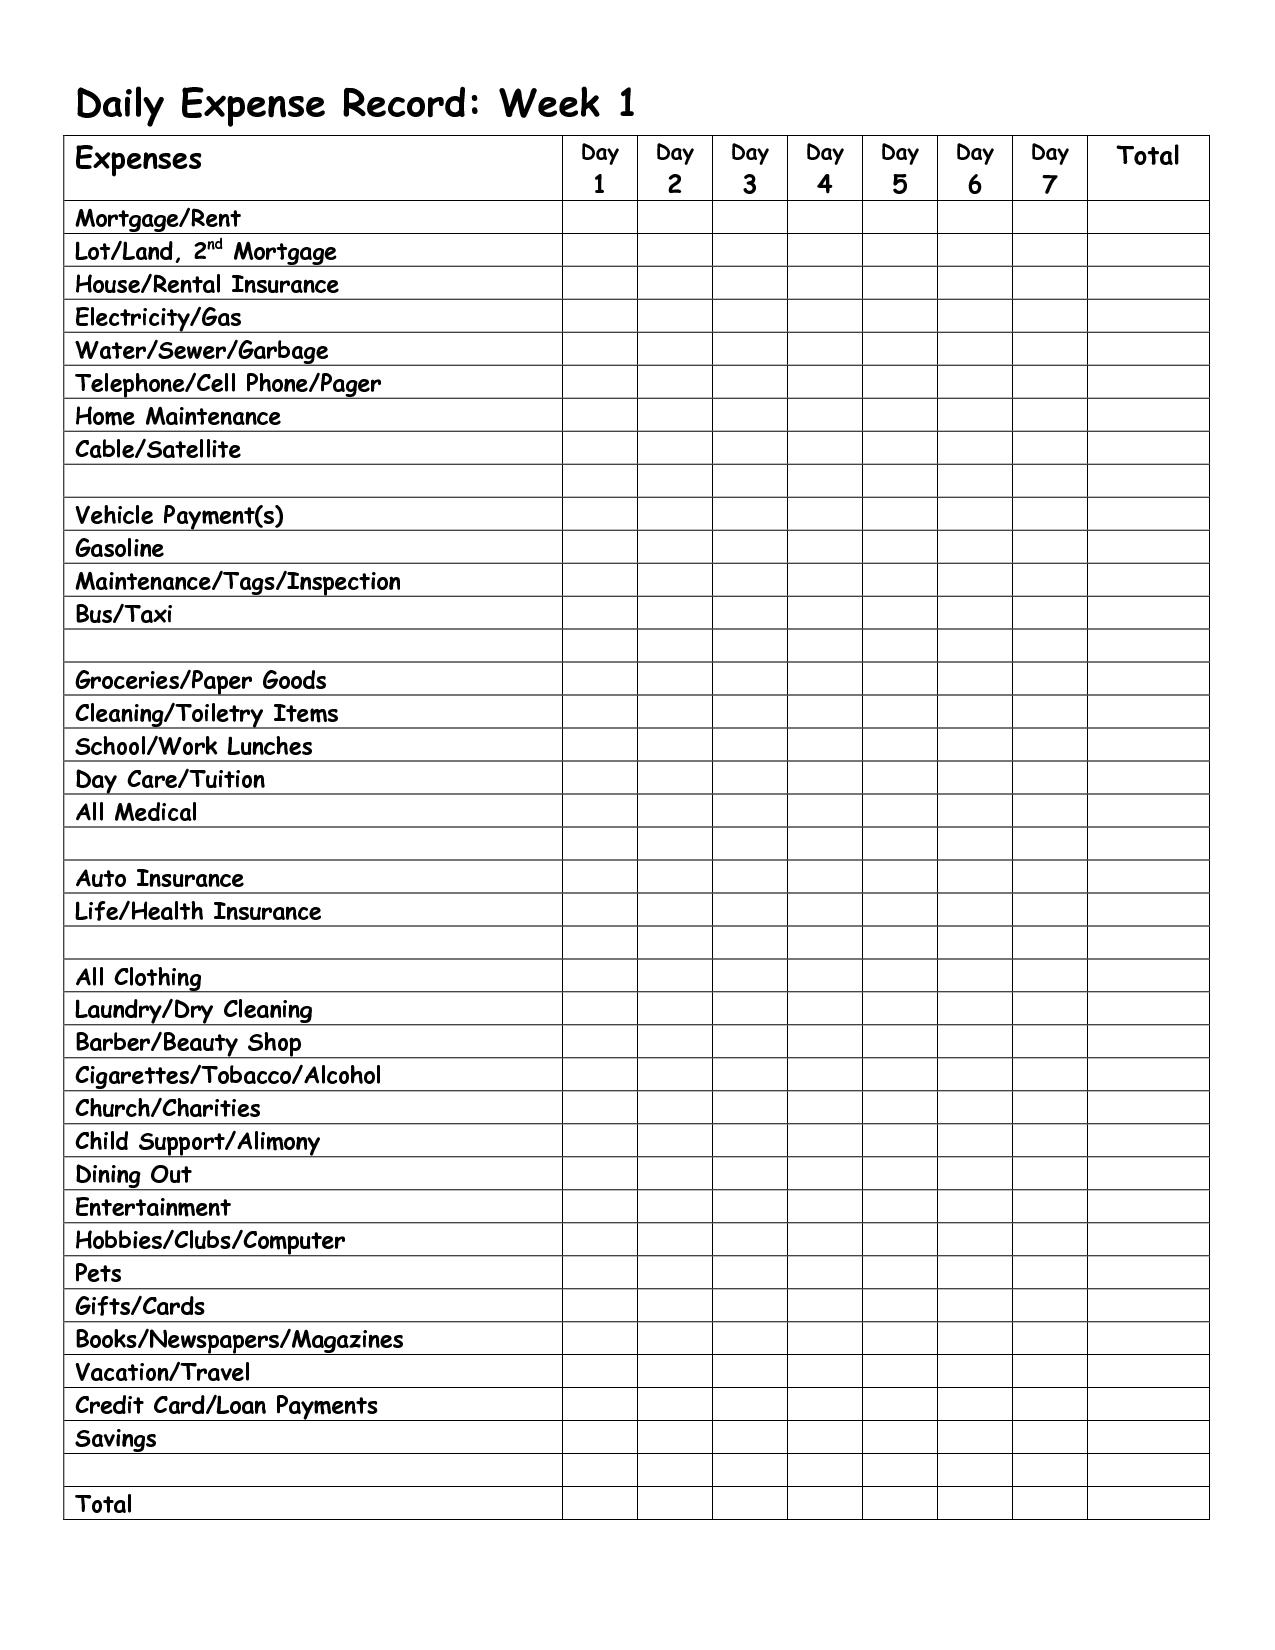 Monthly Expense Report Template | Daily Expense Record Week Regarding Machine Shop Inspection Report Template